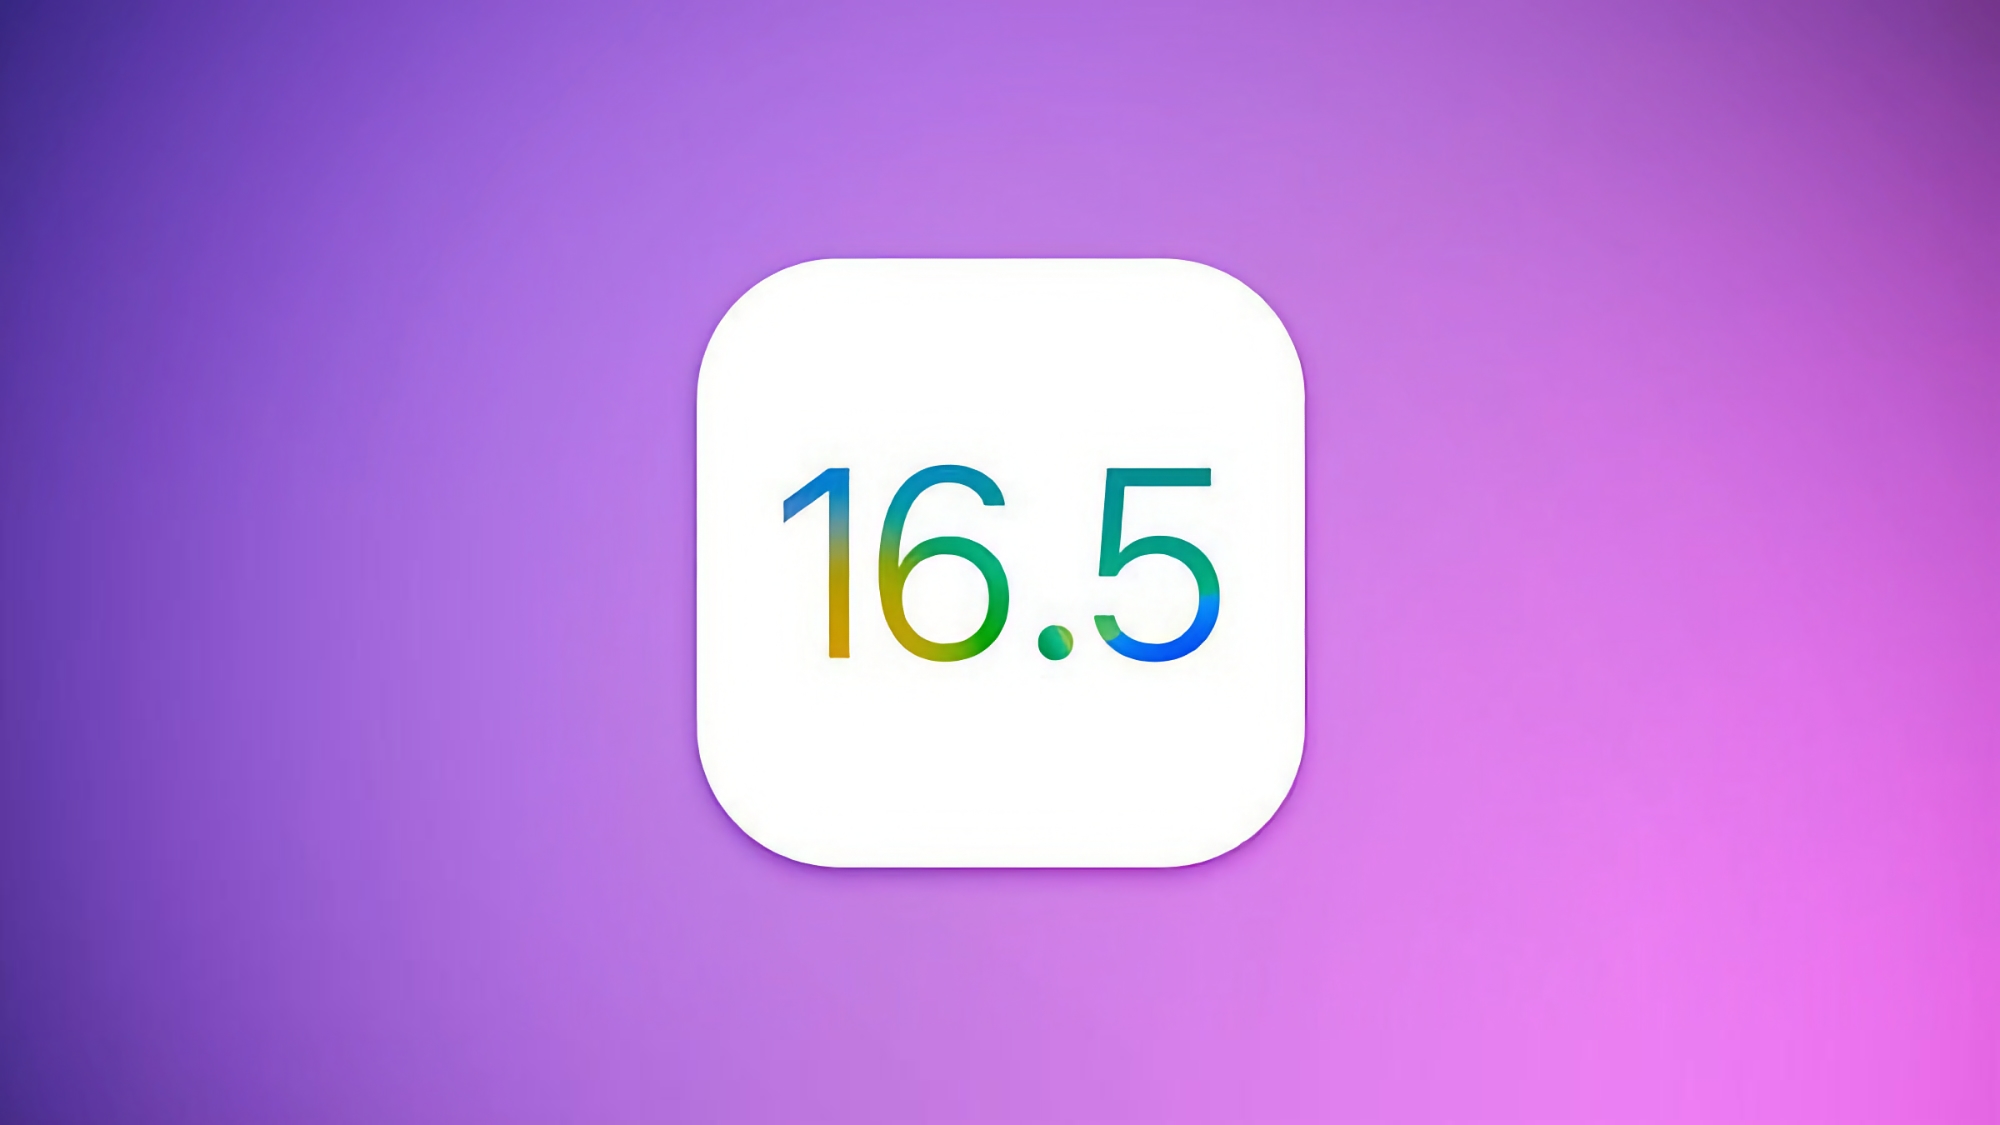 Apple has launched a pre-release version of iOS 16.5